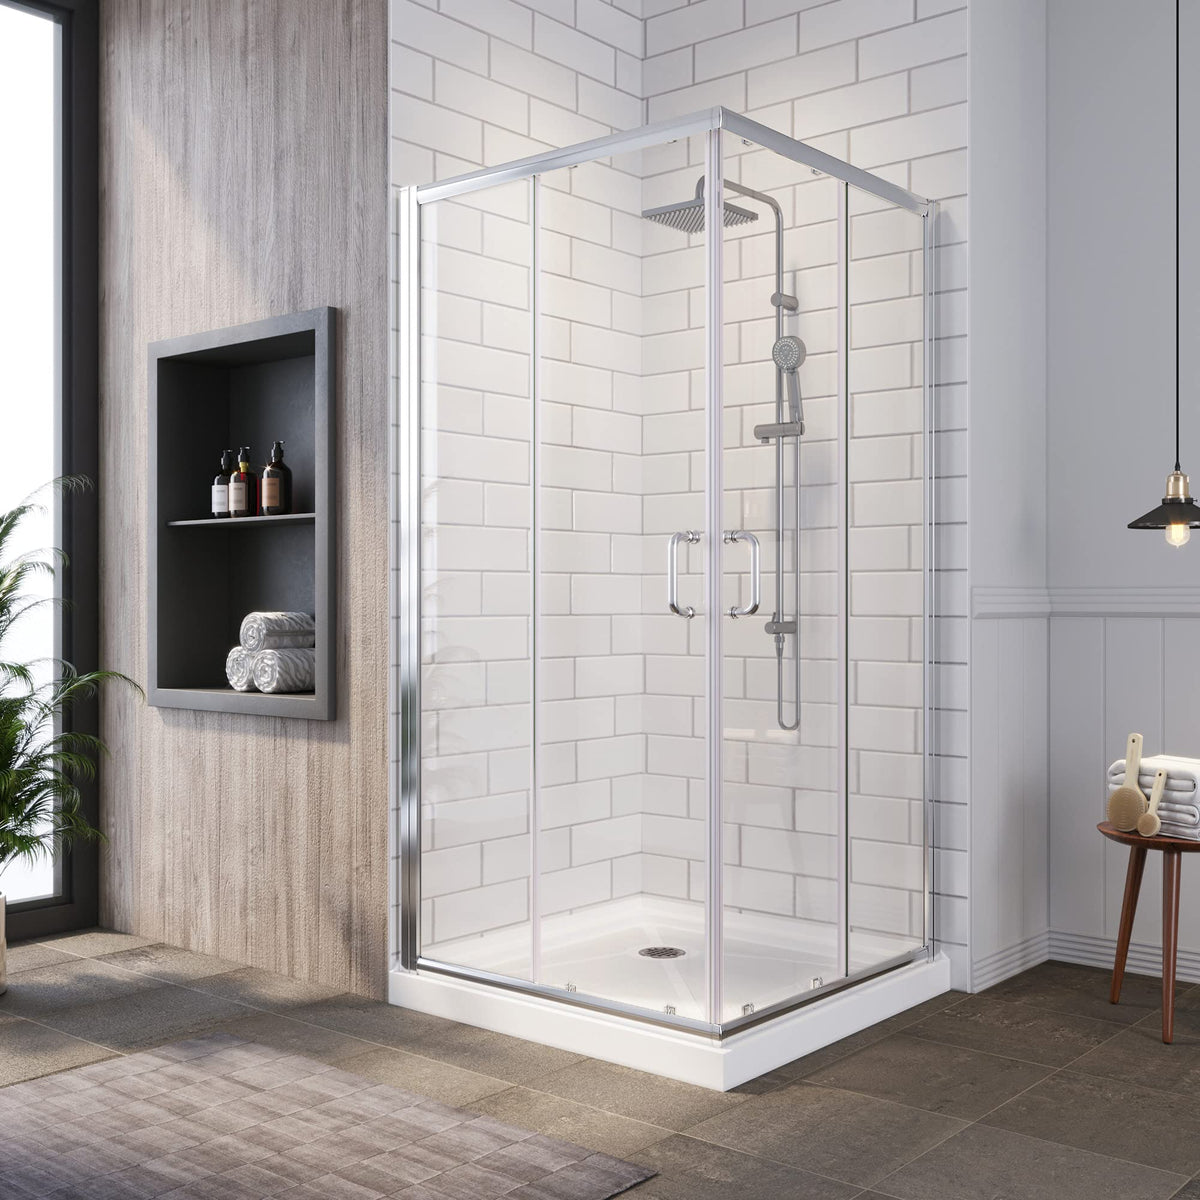 SUNNY SHOWER 36 in. W x 36 in. D x 72 in. H Chrome Finish Corner Entry Enclosure With Sliding Doors And White Square Base